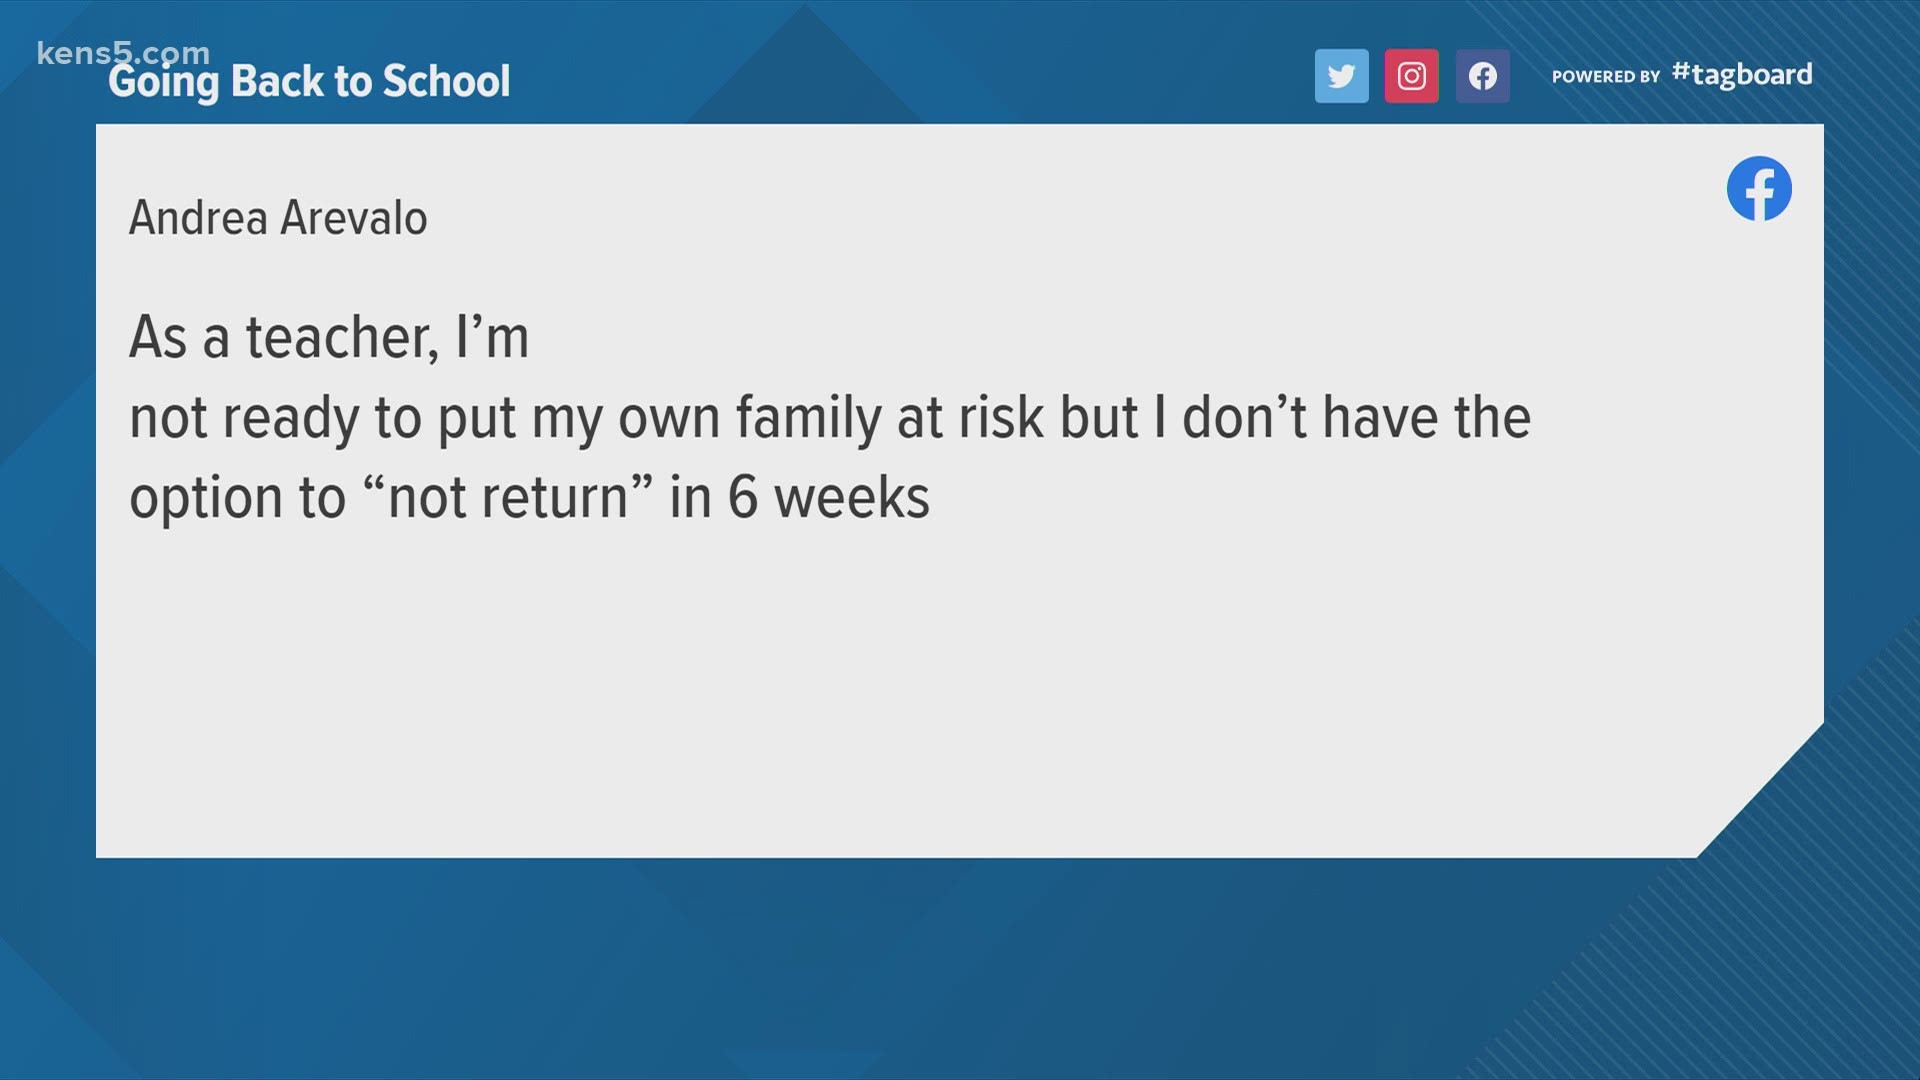 Audrey Castoreno shares what viewers are saying about plans for returning to school this fall.